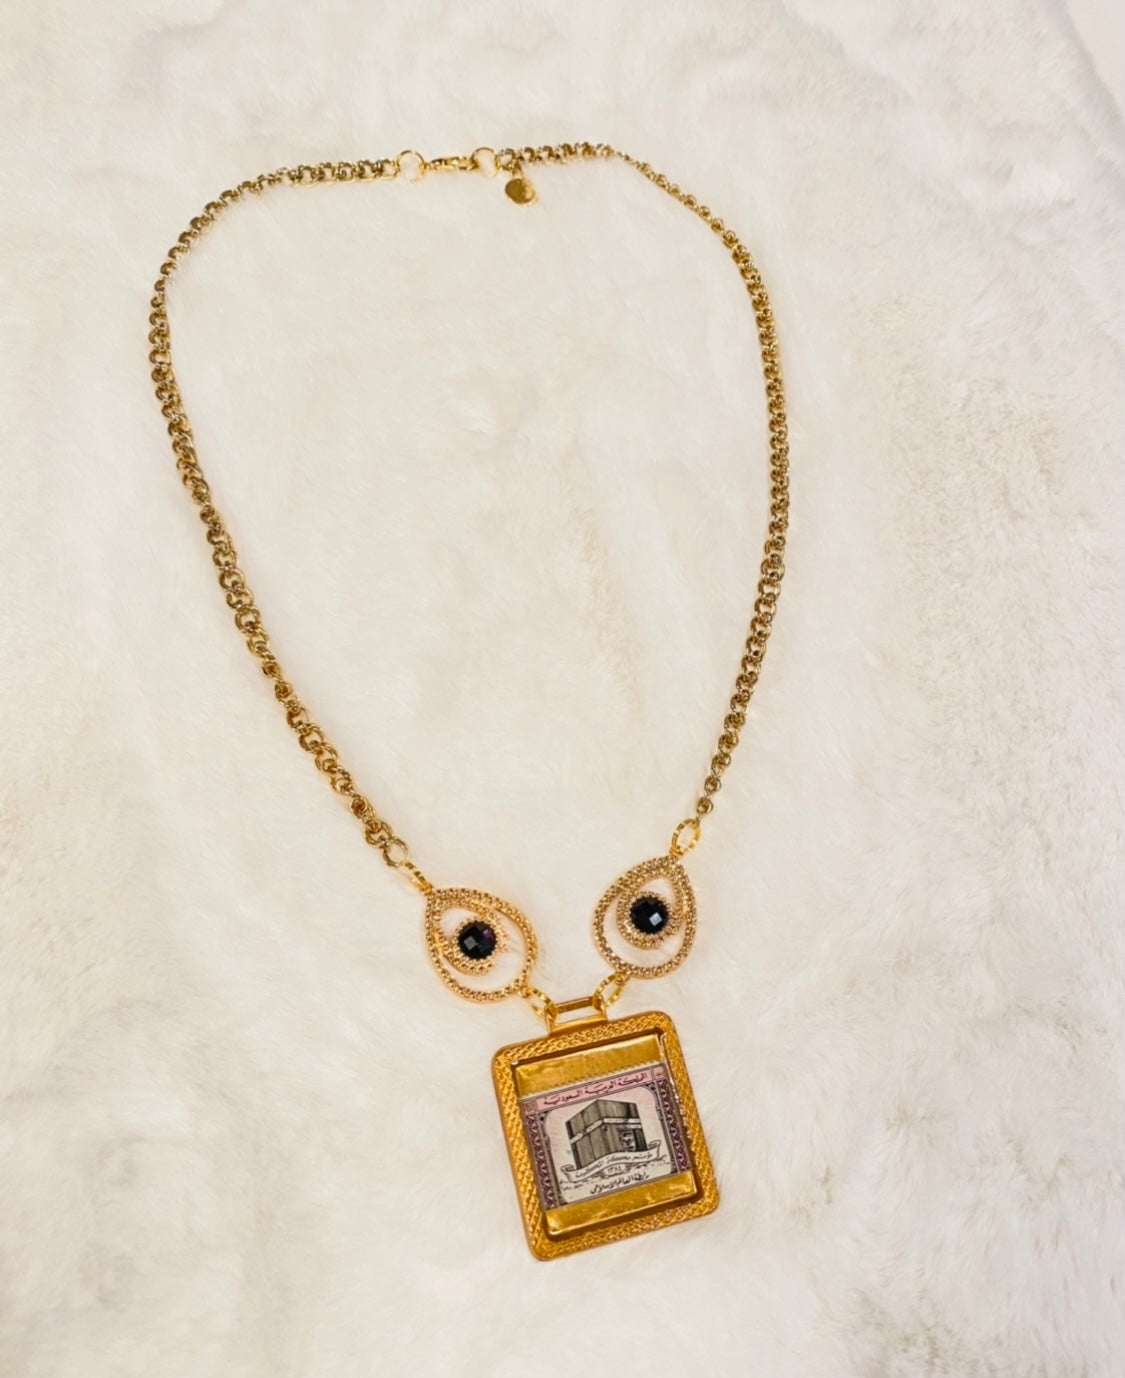 Vintage Necklace - The Kaaba in Pink